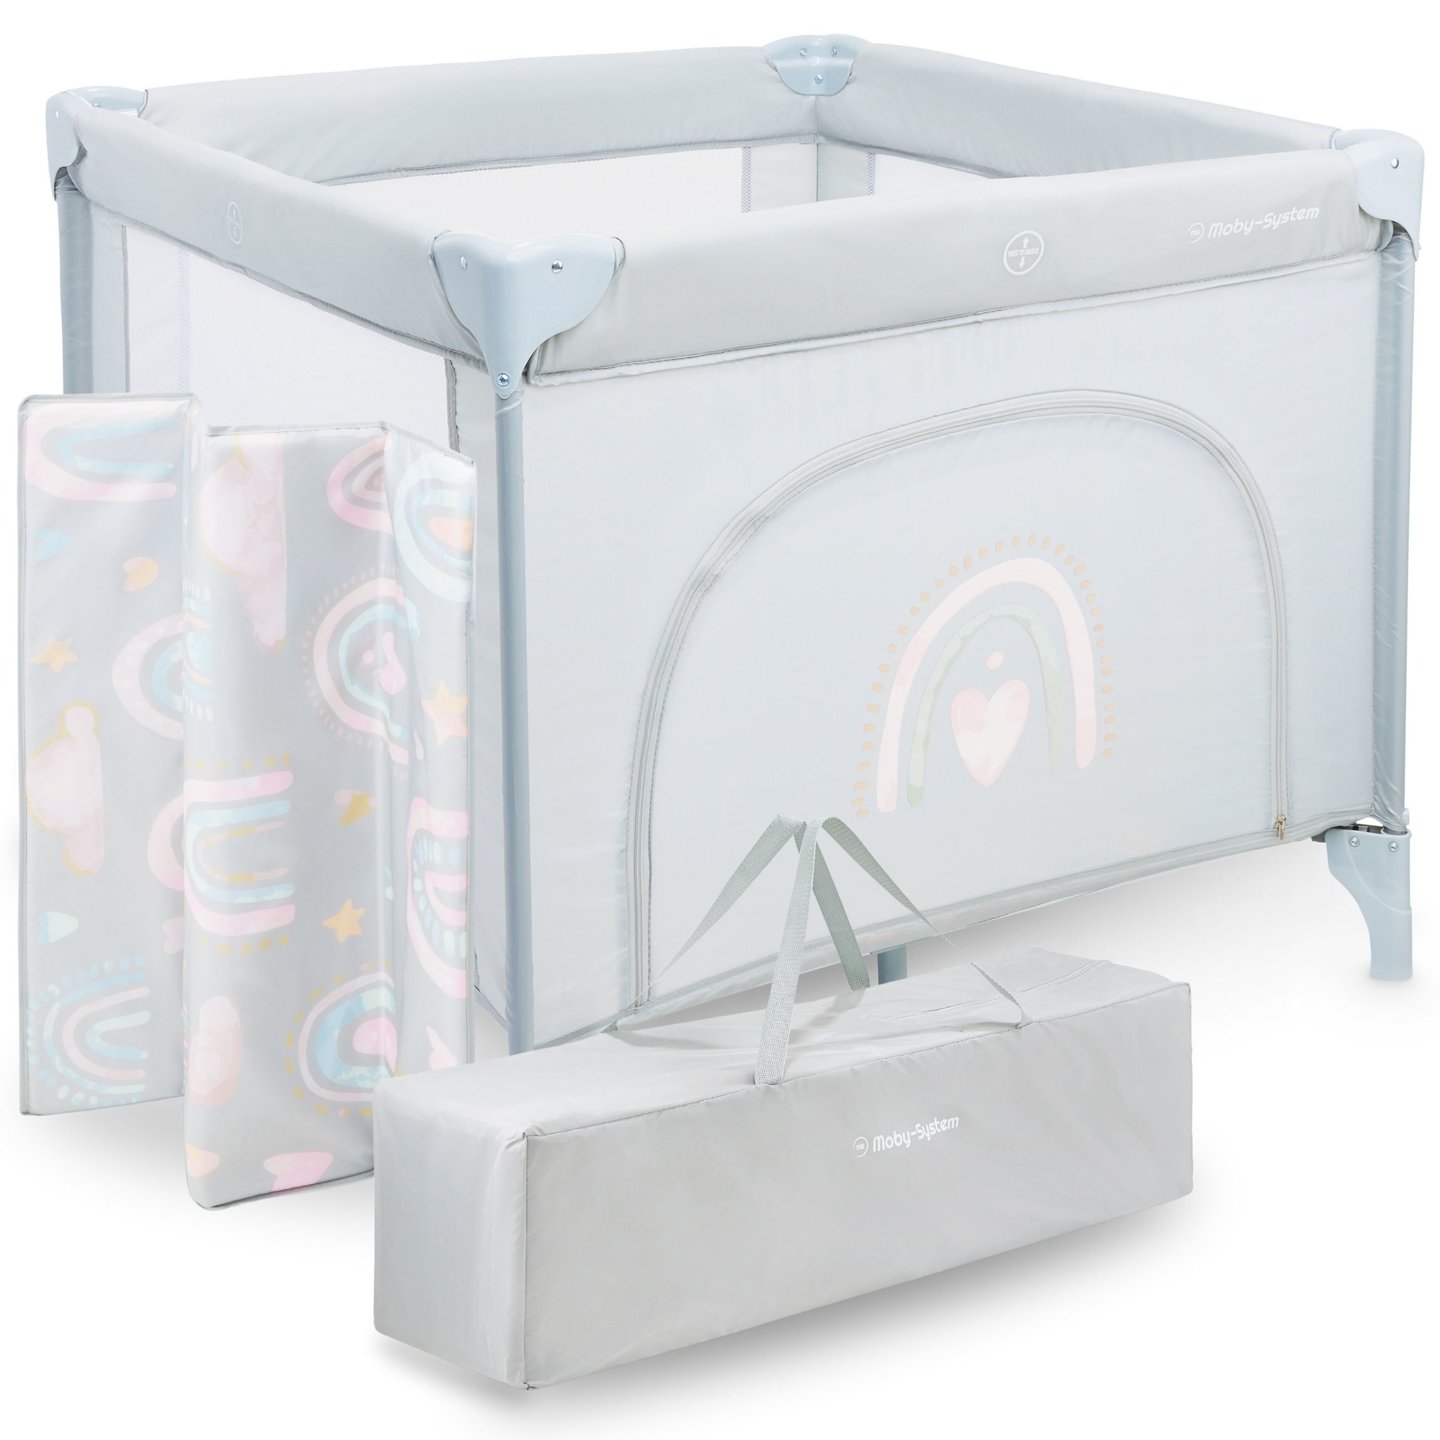 Folding playpen, baby travel crib with mattress and carry bag - Rainbow